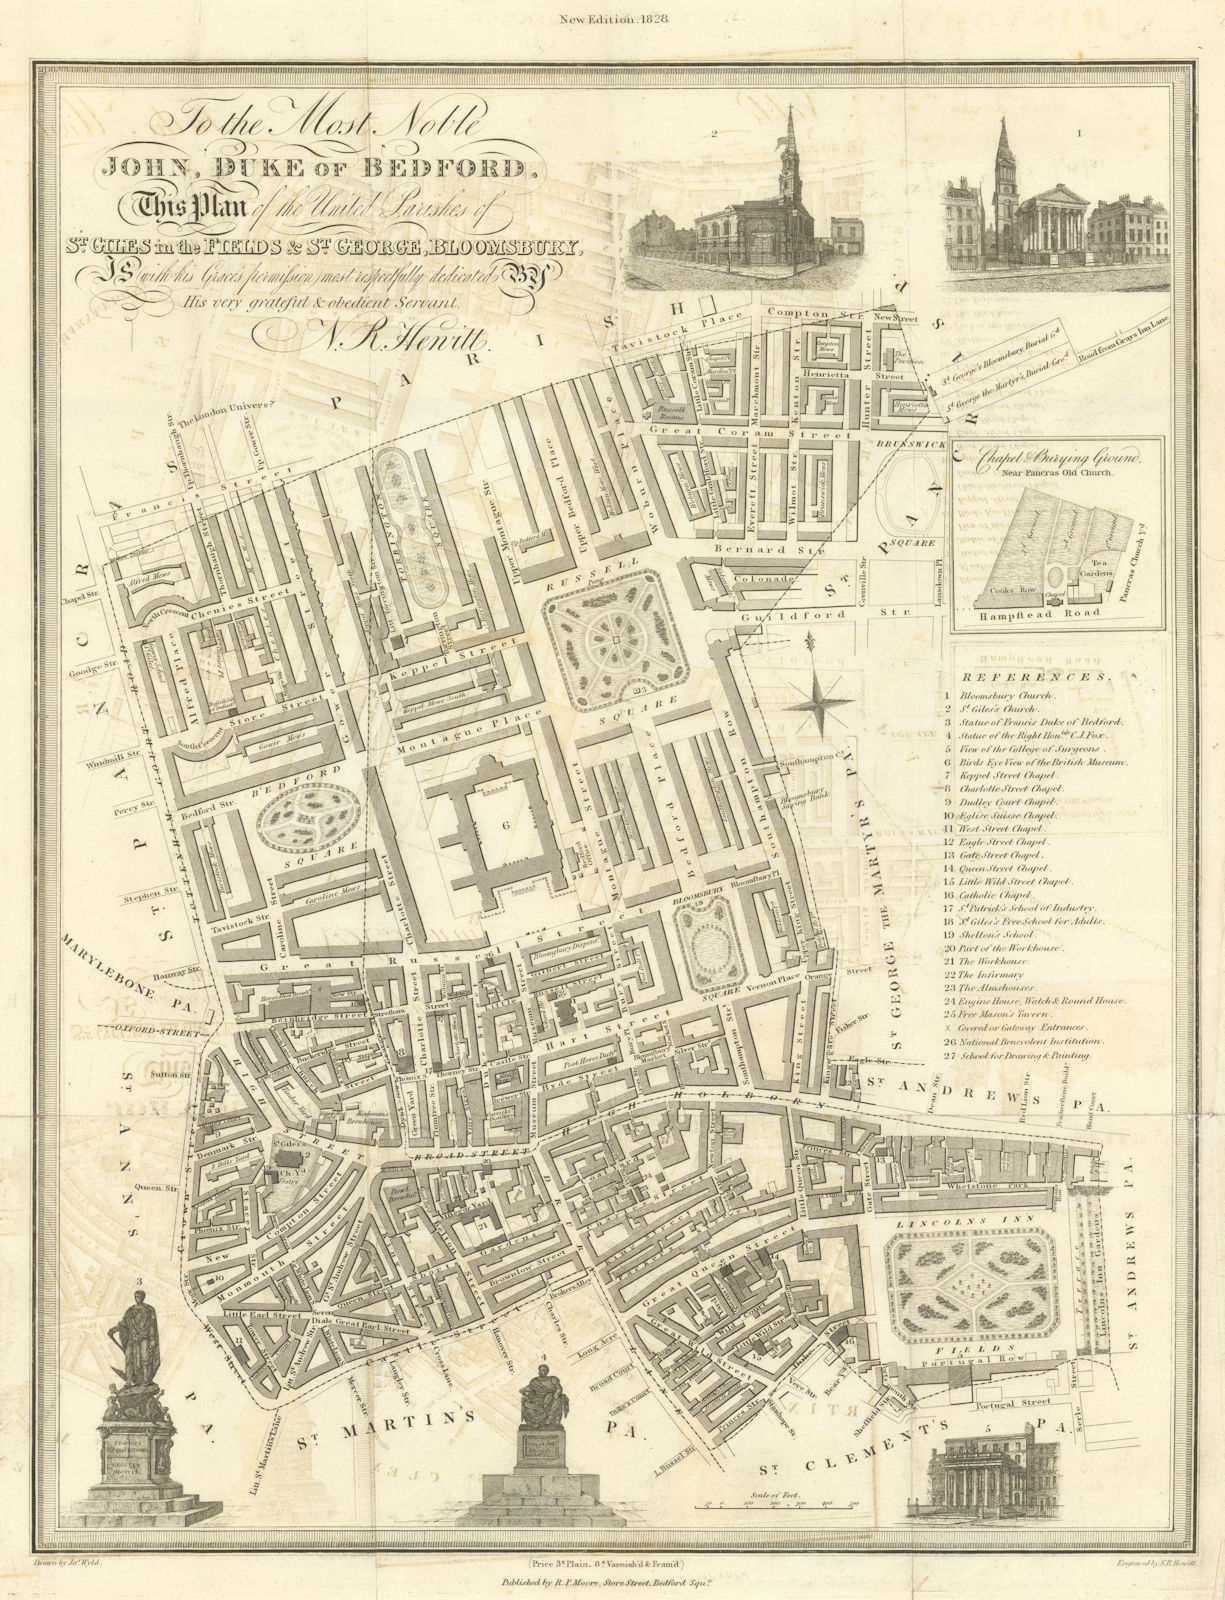 The United Parishes of St. Giles in the Fields & St. George, Bloomsbury 1828 map